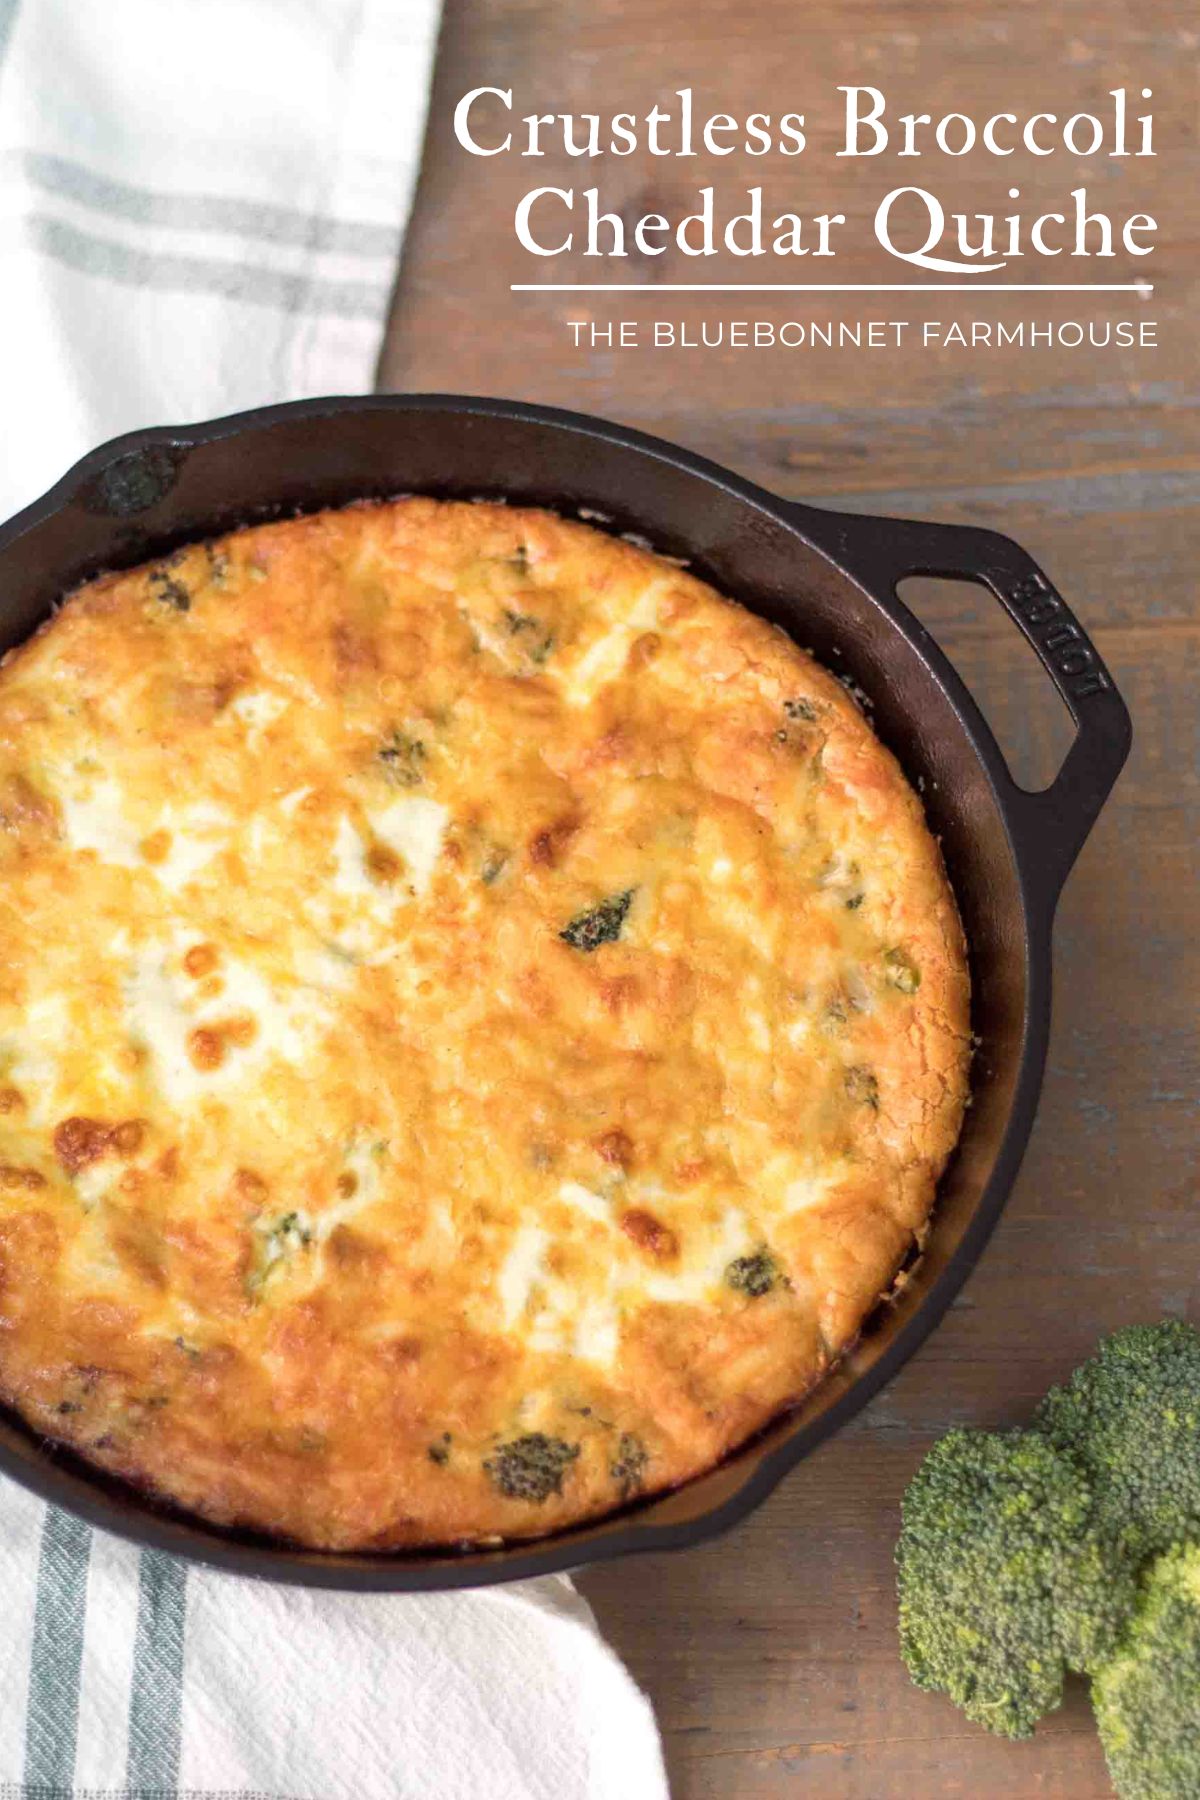 baked quiche in a cast iron skillet with broccoli florets on a farmhouse table. text reads "crustless broccoli cheddar quiche"